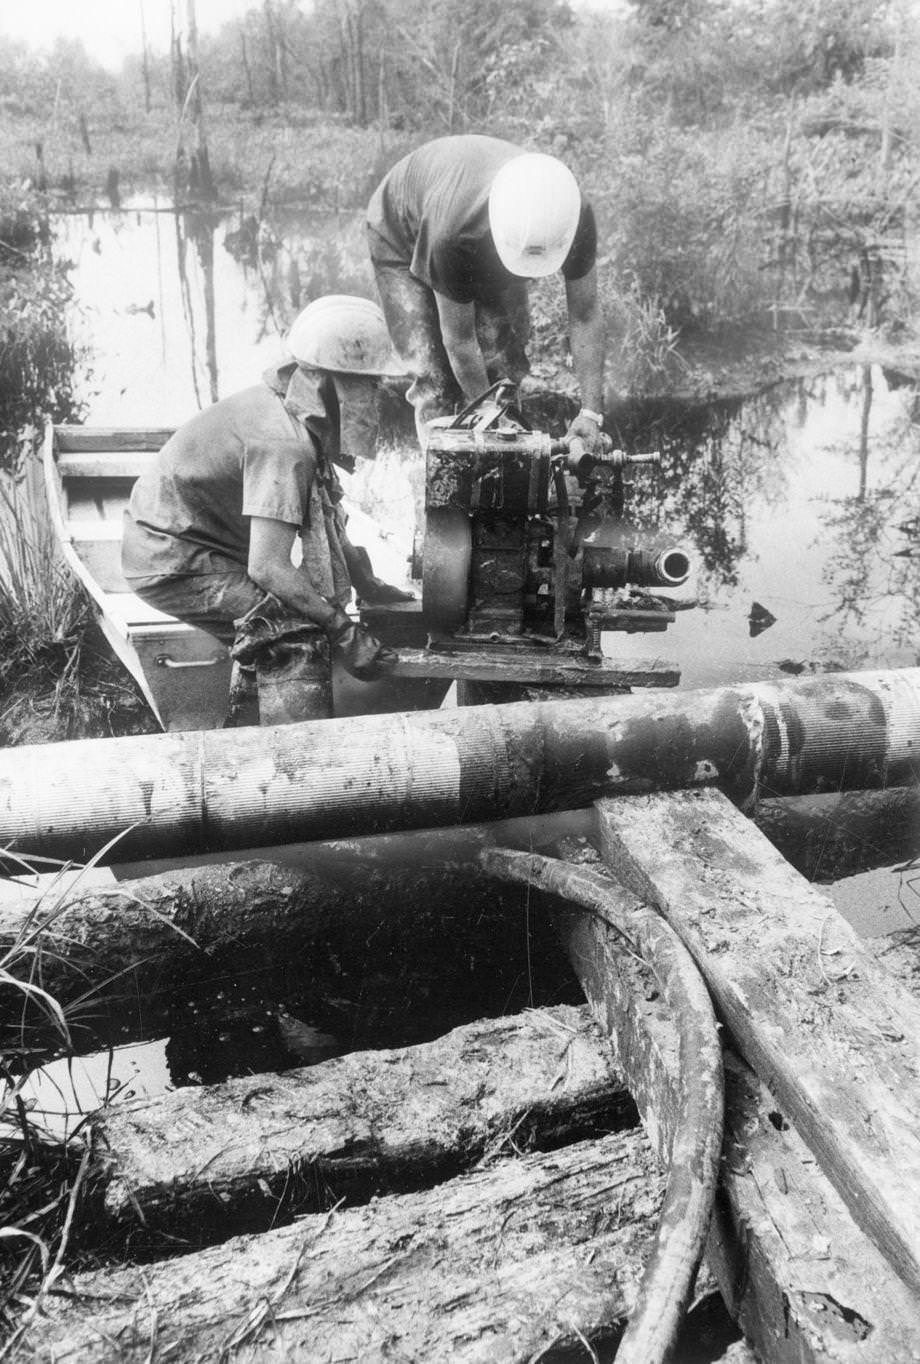 A cleanup crew from Norfolk worked on an oil spill in South Richmond. Fuel oil had escaped from an open valve at Little Oil Co. on Commerce Road, 1975.